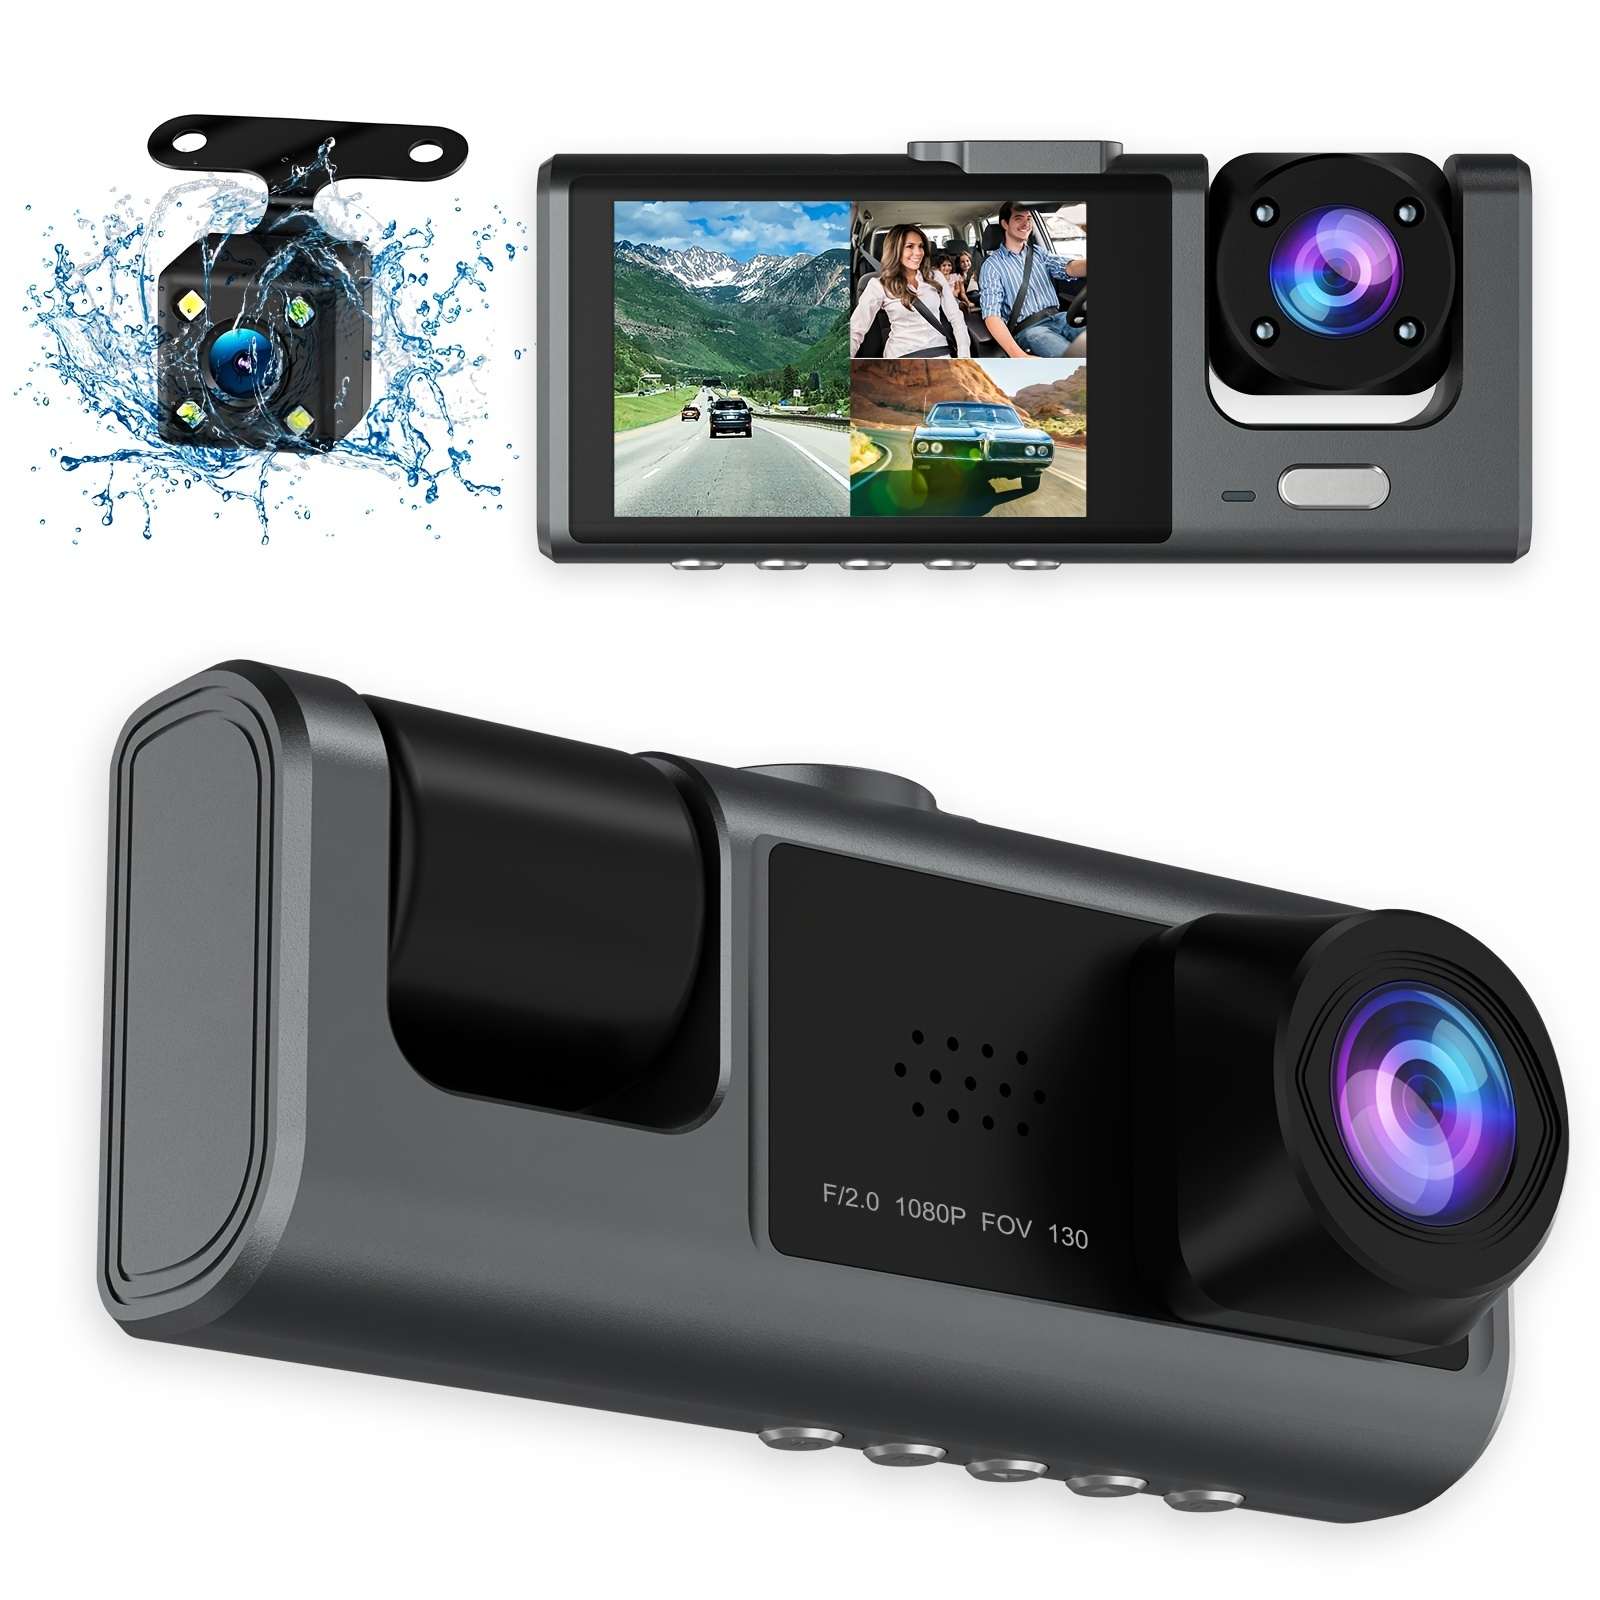 TSV Dual Dash Cam, 1080p Front and Rear Dual Dash Camera for Cars, 3.16inch Display, 170 Wide Angle Dashboard Camera Recorder with Parking Monitoring